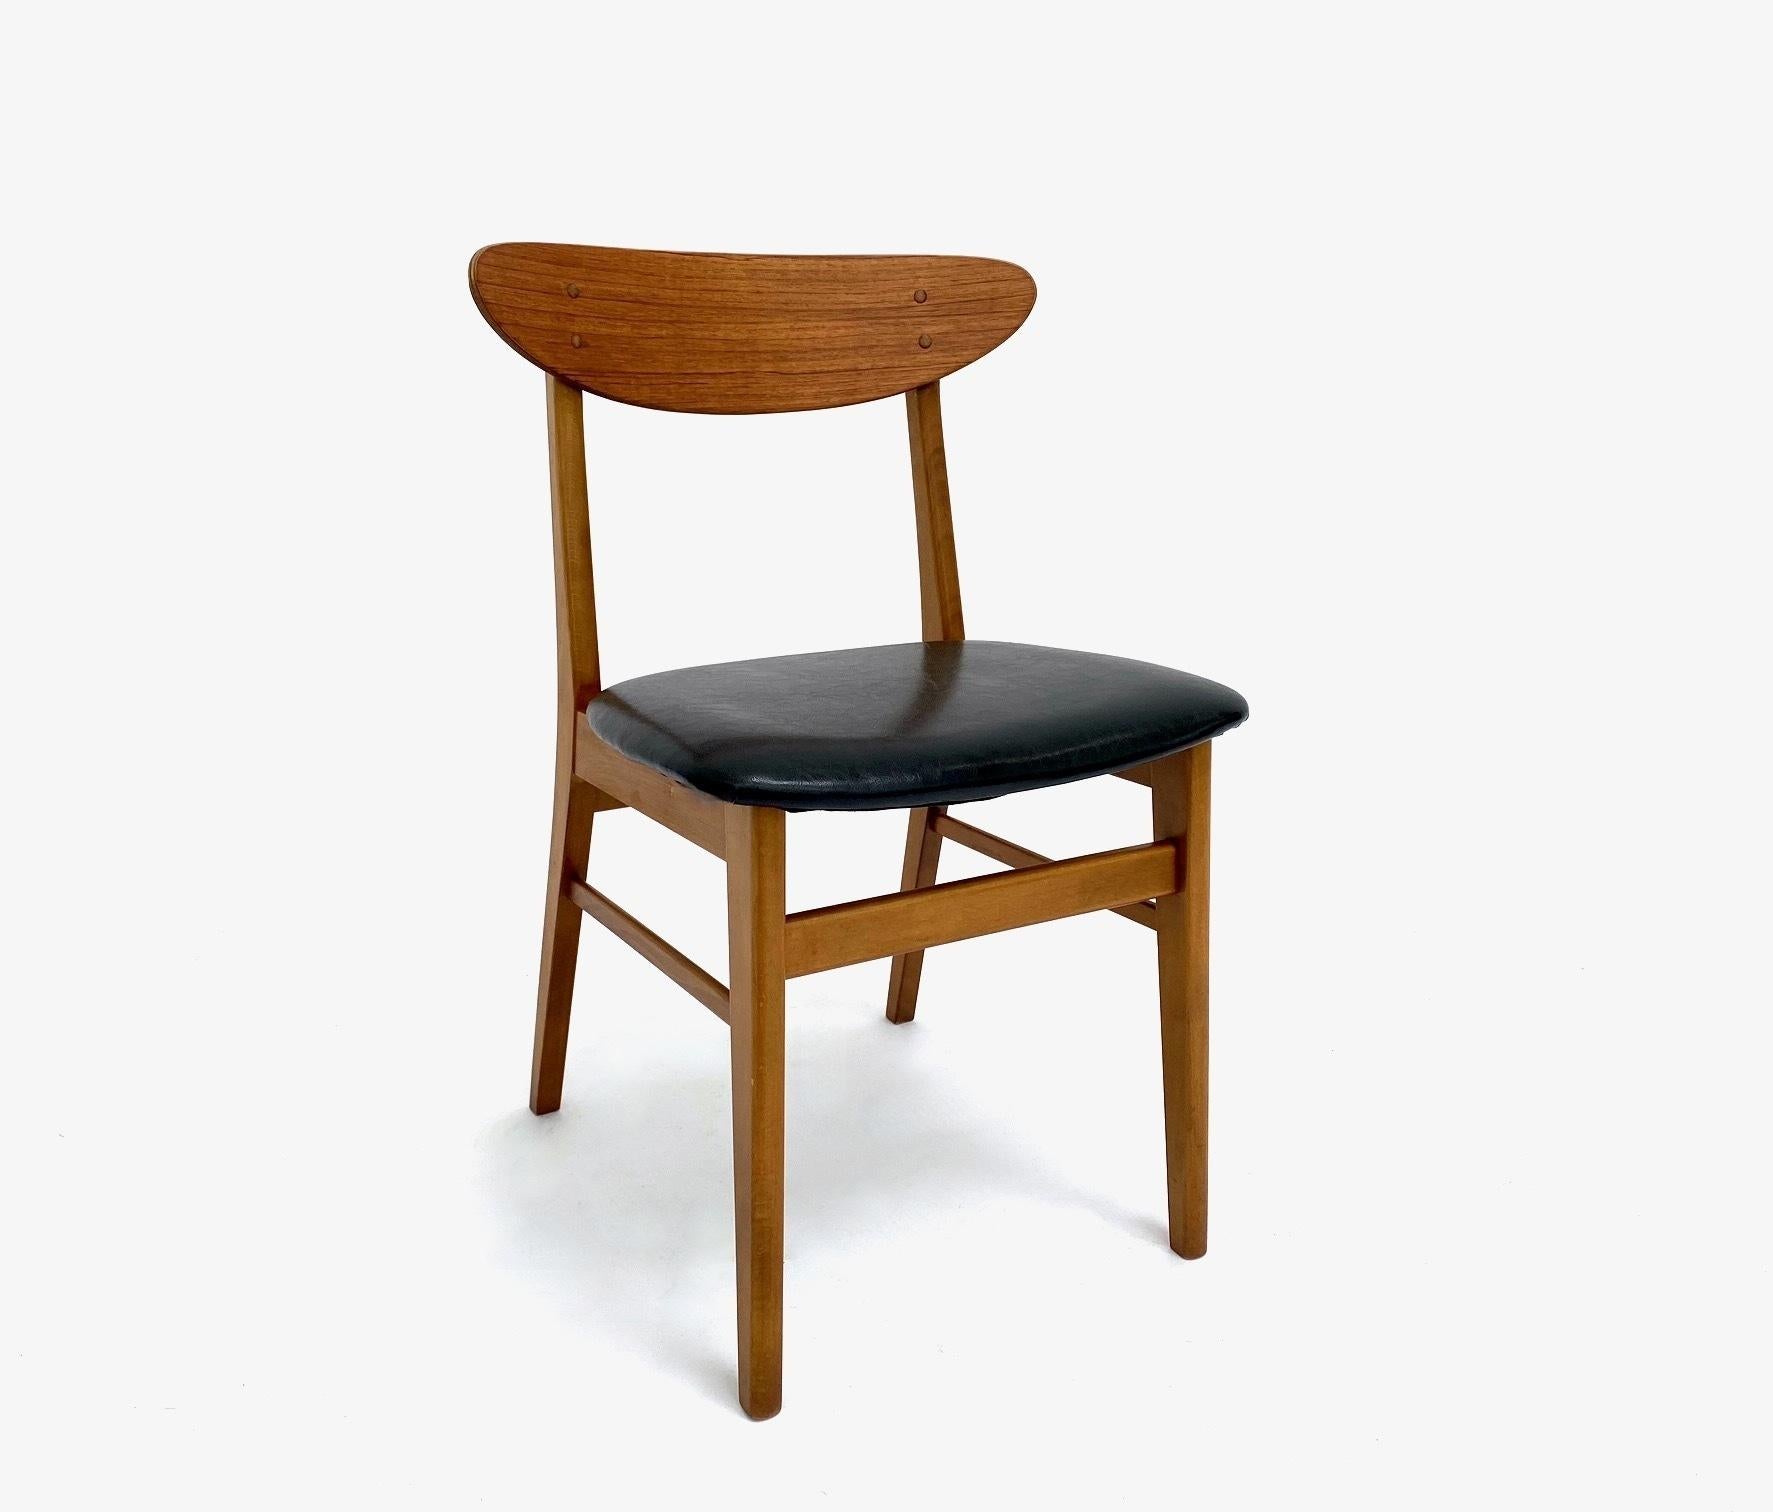 A beautiful set of 4 teak & beech black vinyl Model 210 dining chairs by Farstrup, these would make a stylish addition to any dining area.

The chairs have wide seat pads and sculptured timber backrests for enhanced comfort. A striking piece of